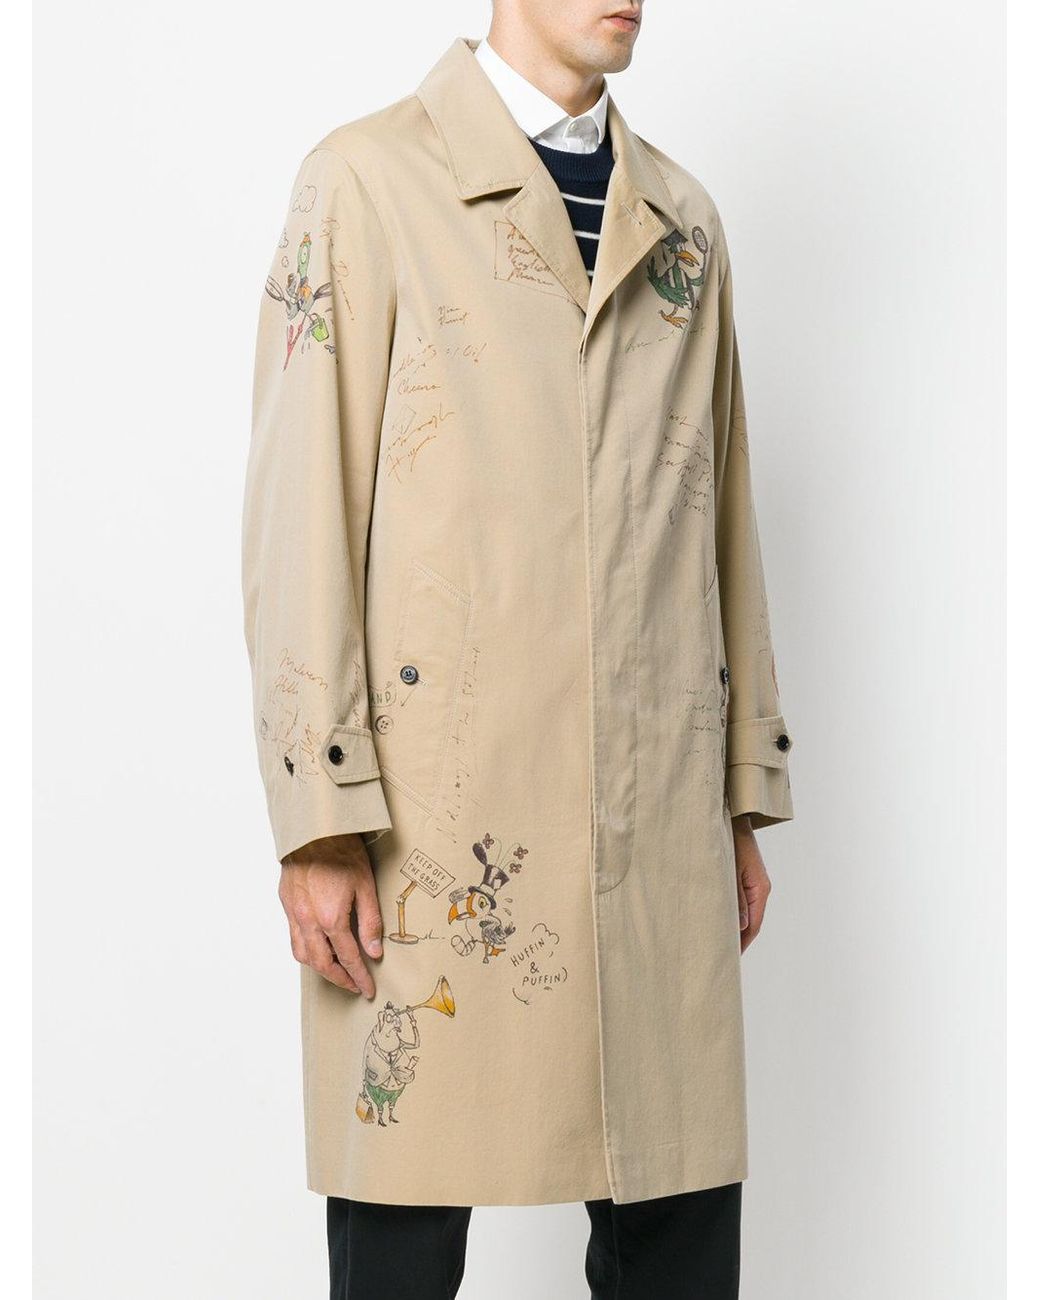 Burberry Sketch Print Tropical Trench Coat in Natural for Men | Lyst